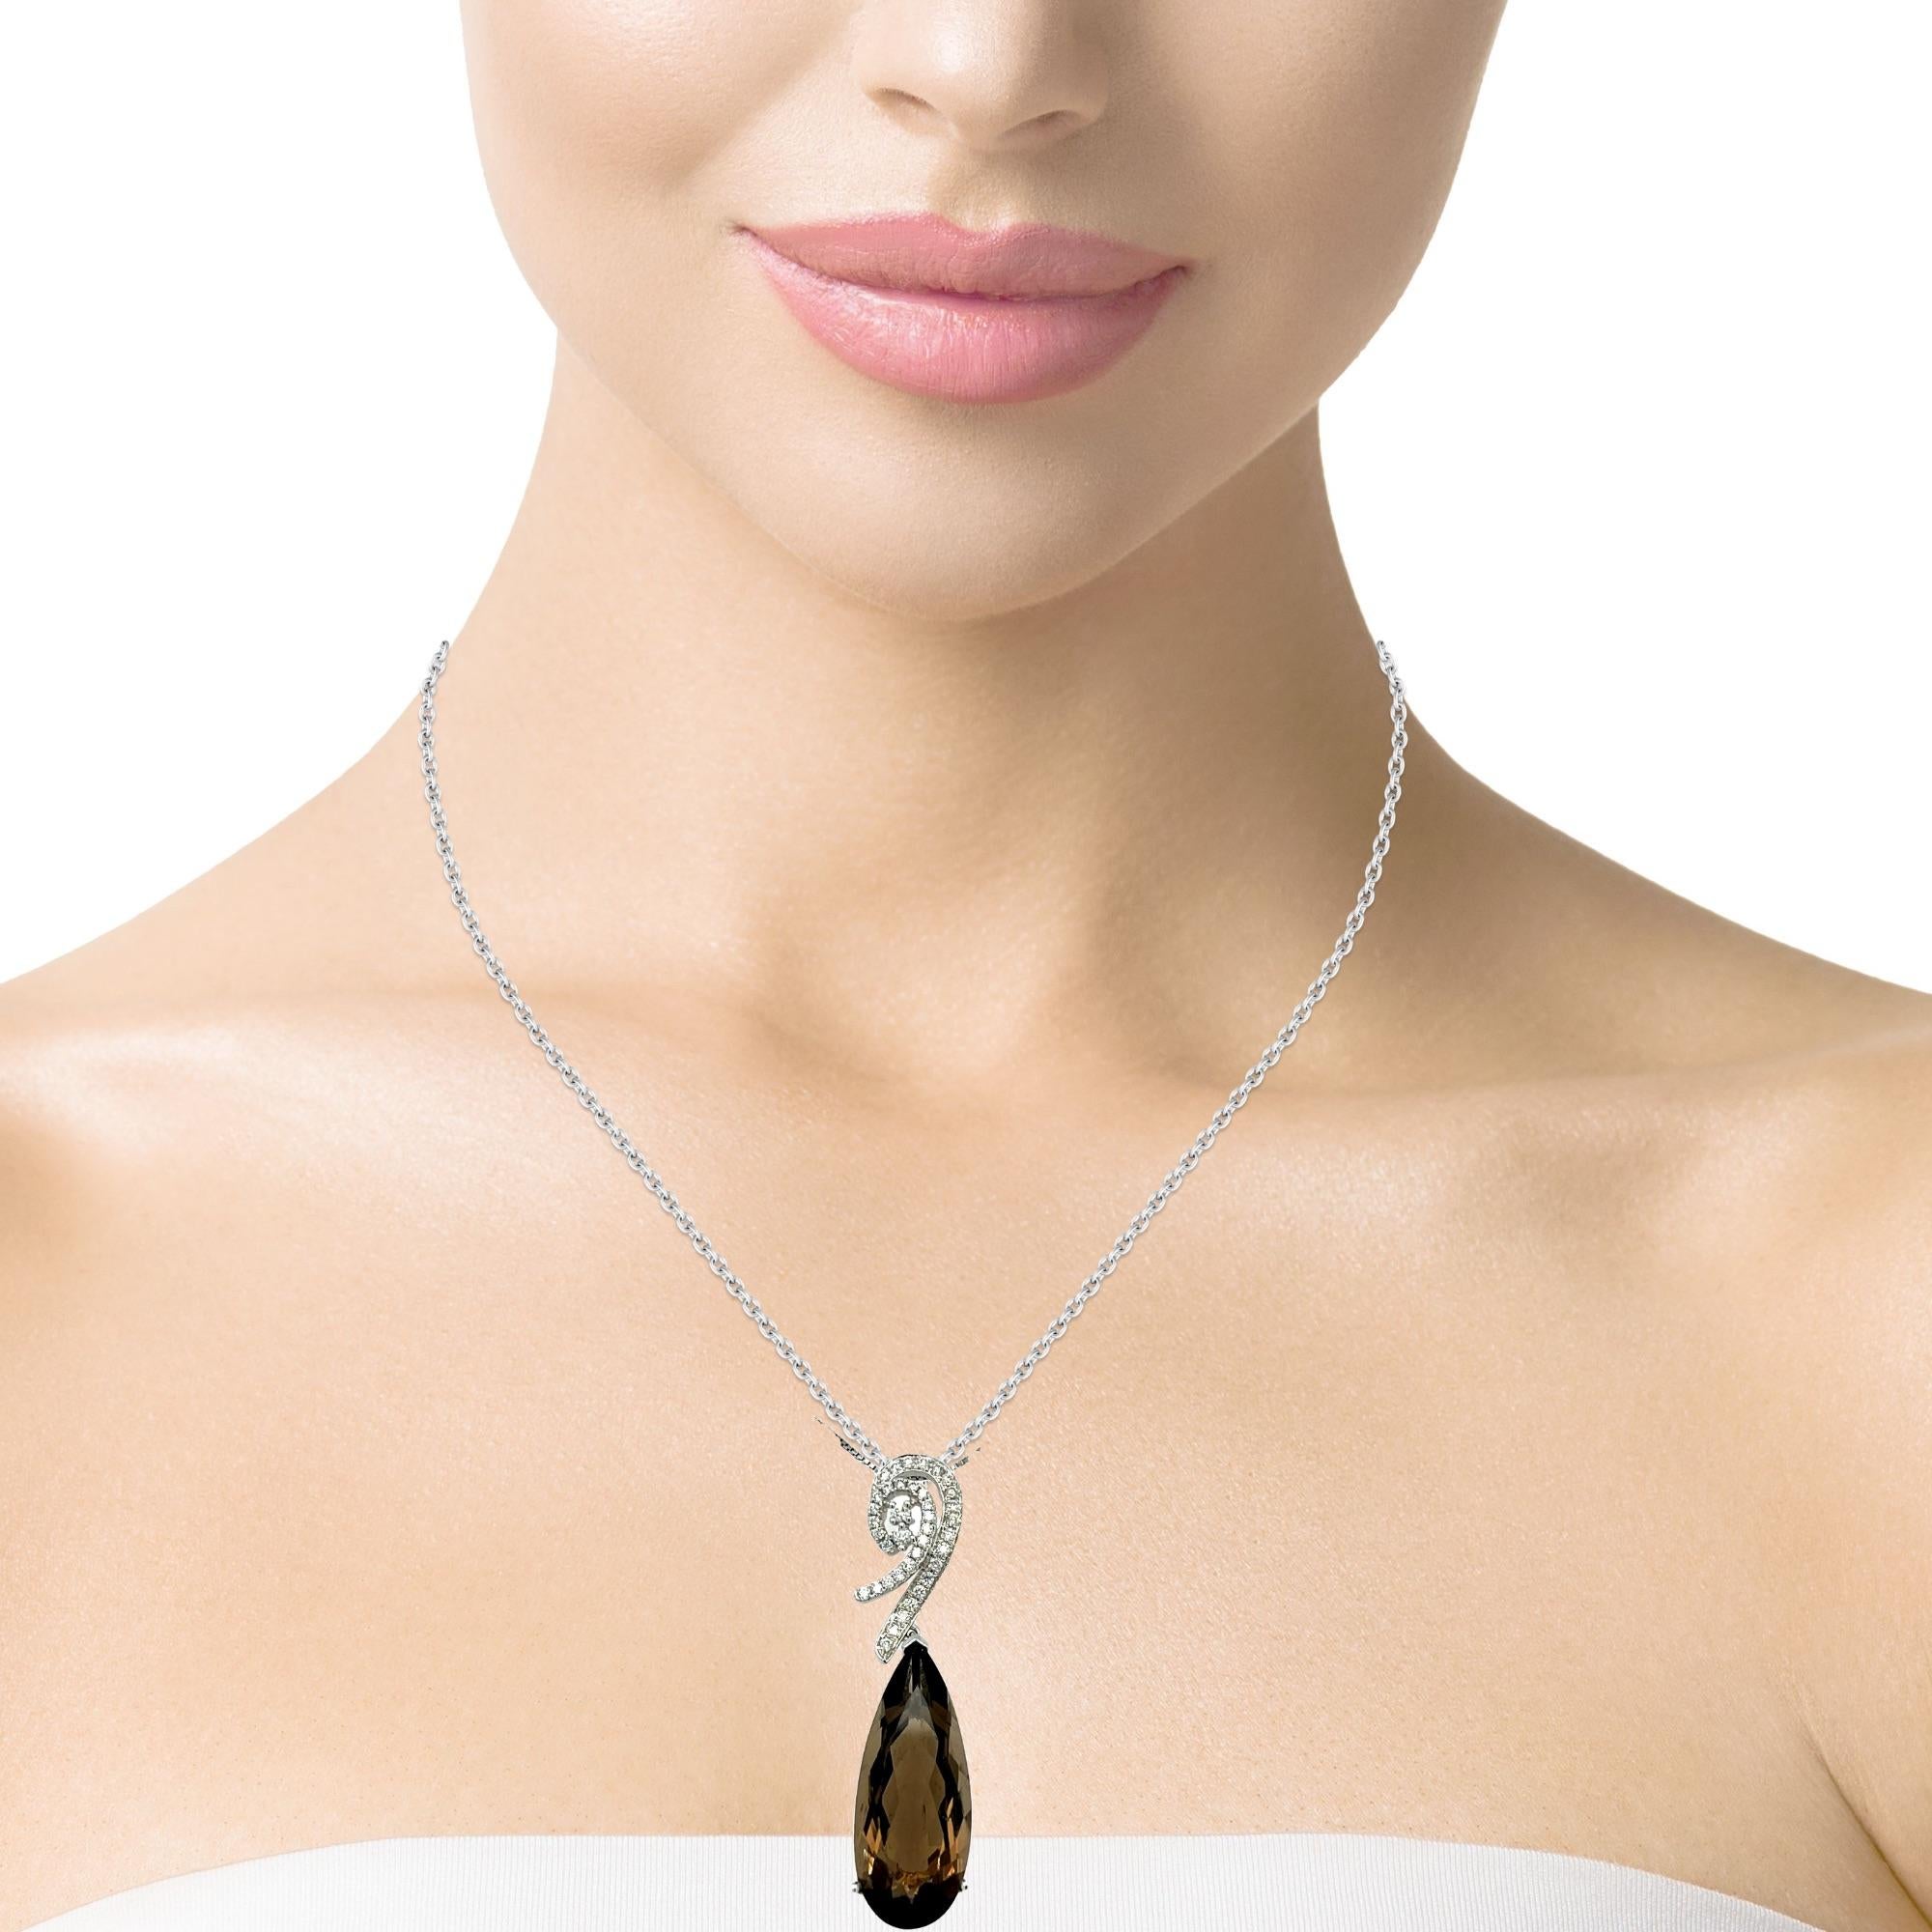 This stunning teardrop pendant has a top quality deep brown Smokey Topaz with a 3 prong setting in 14 karat white gold. There are 29 shimmering brilliant cut diamonds on top of the stone for a delicate accent. This pendant comes in a beautiful black